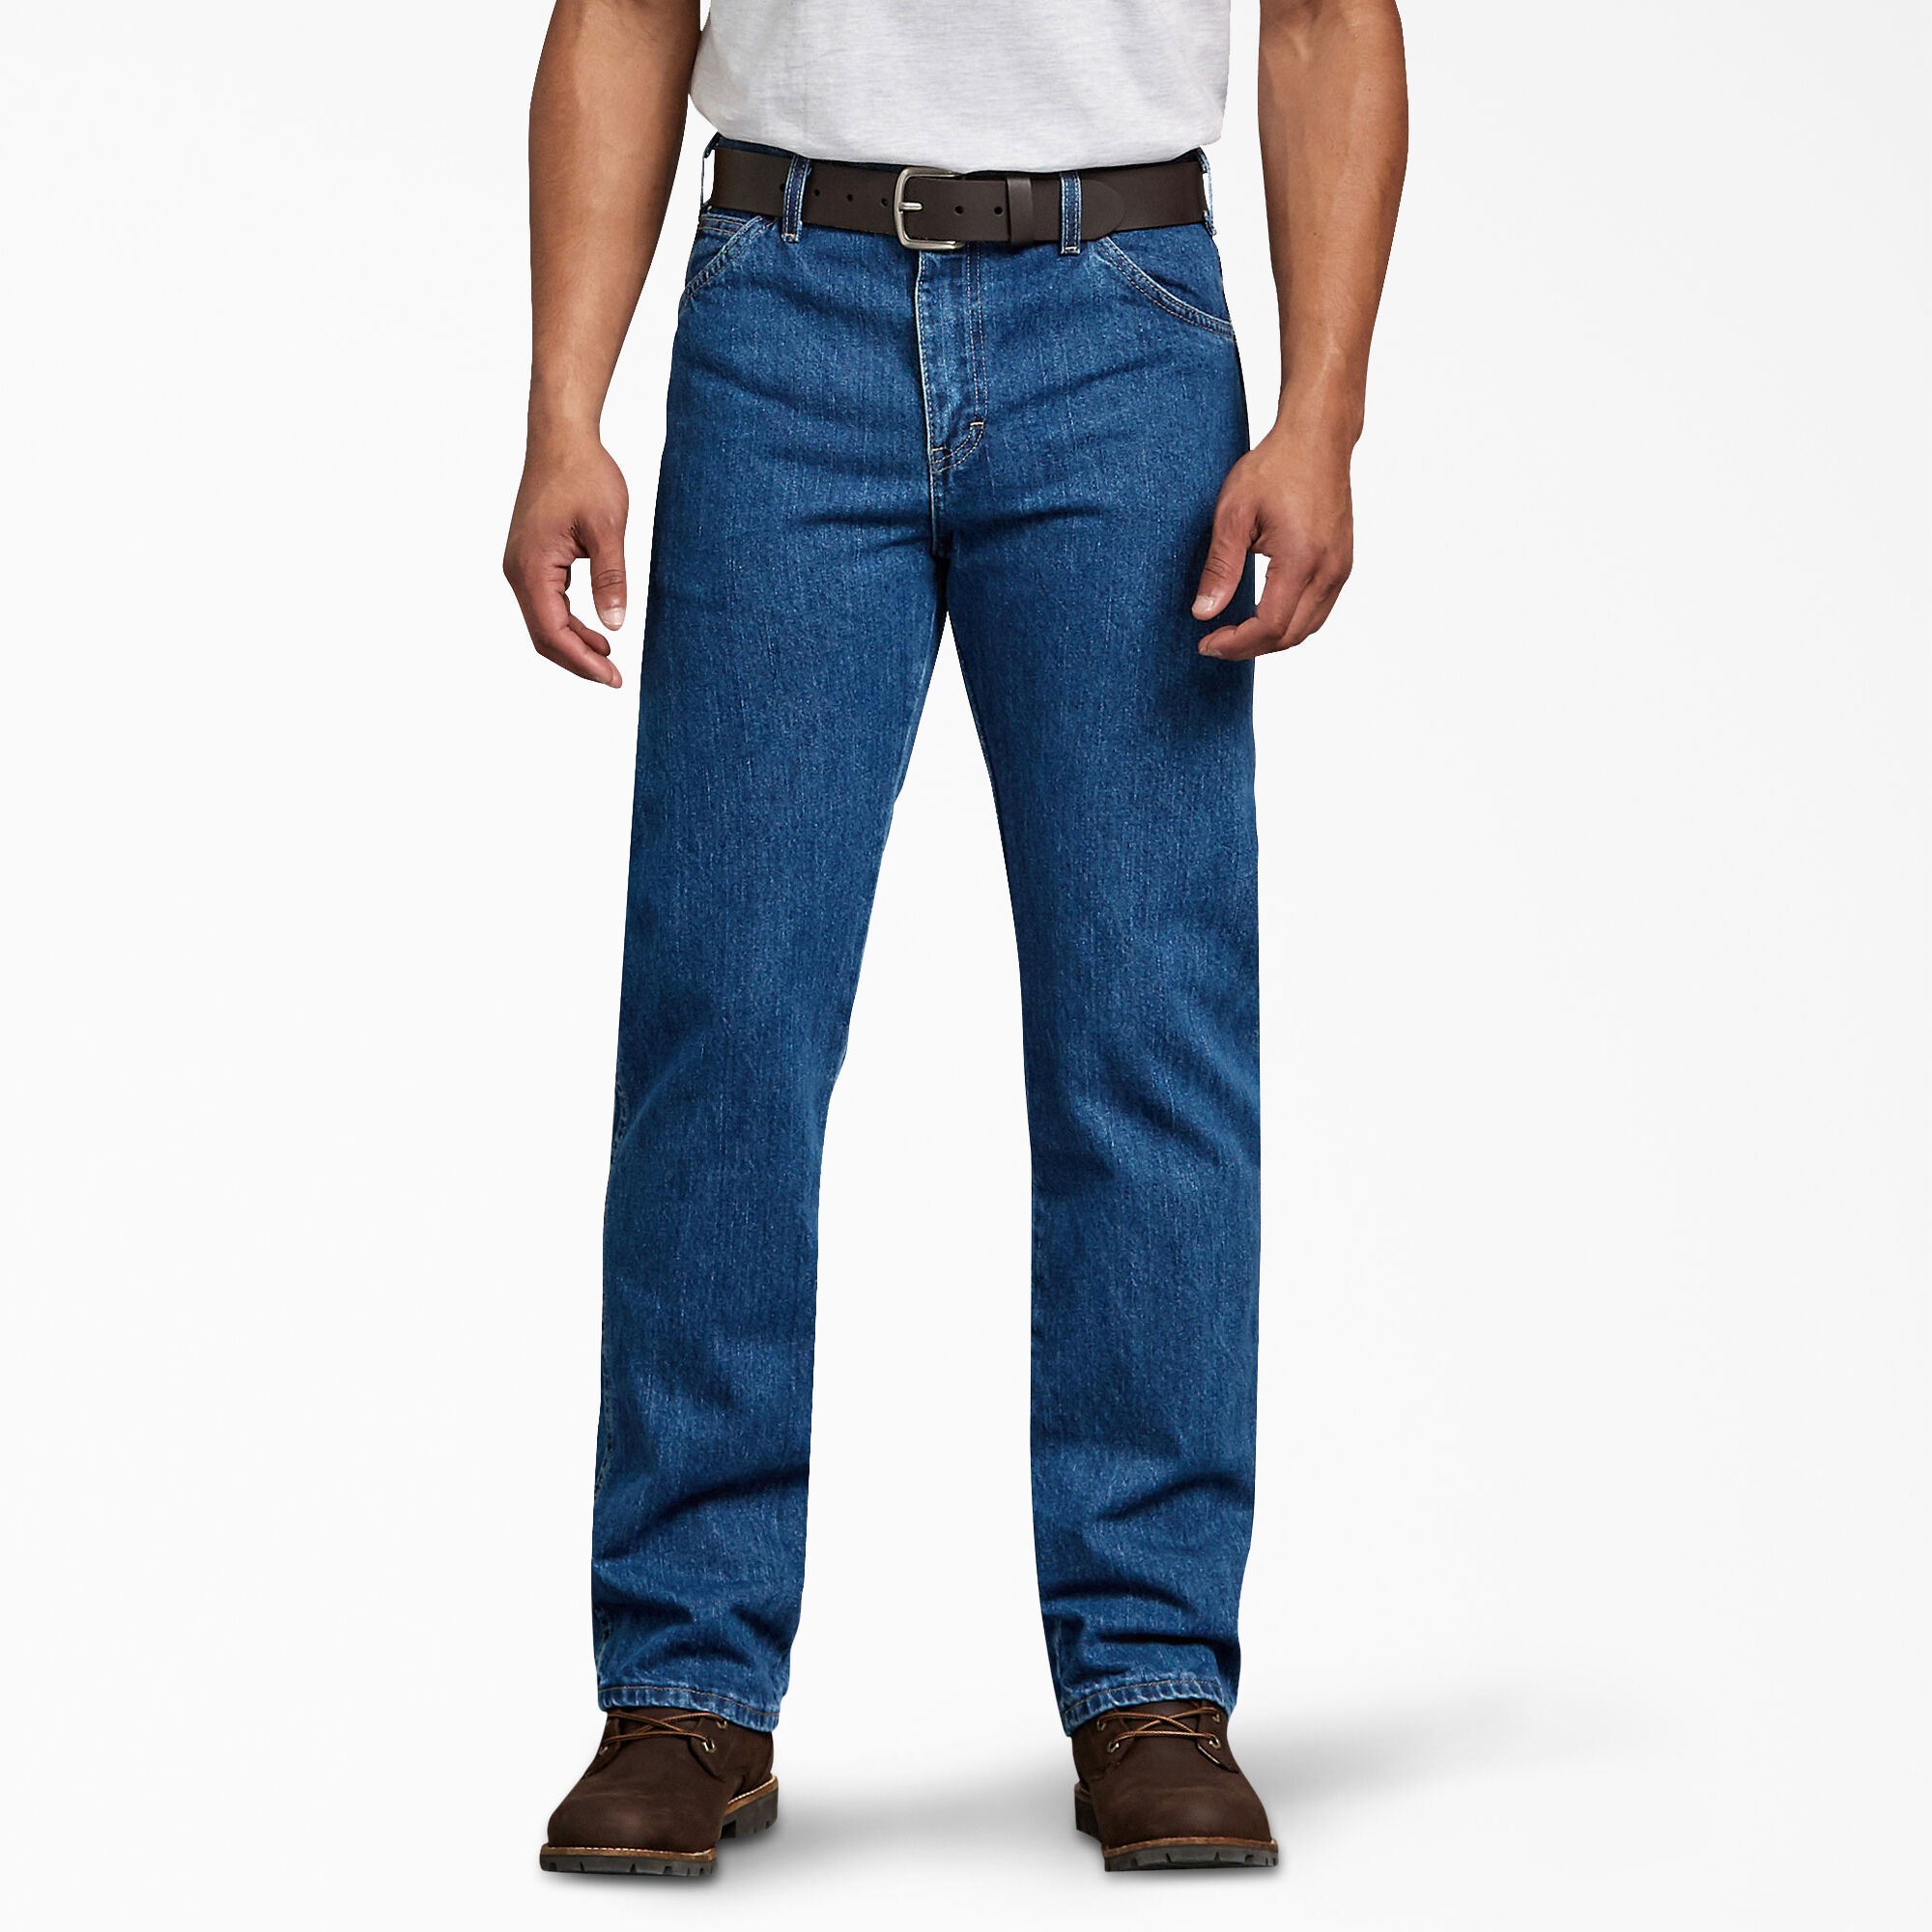 mens jeans with big pockets